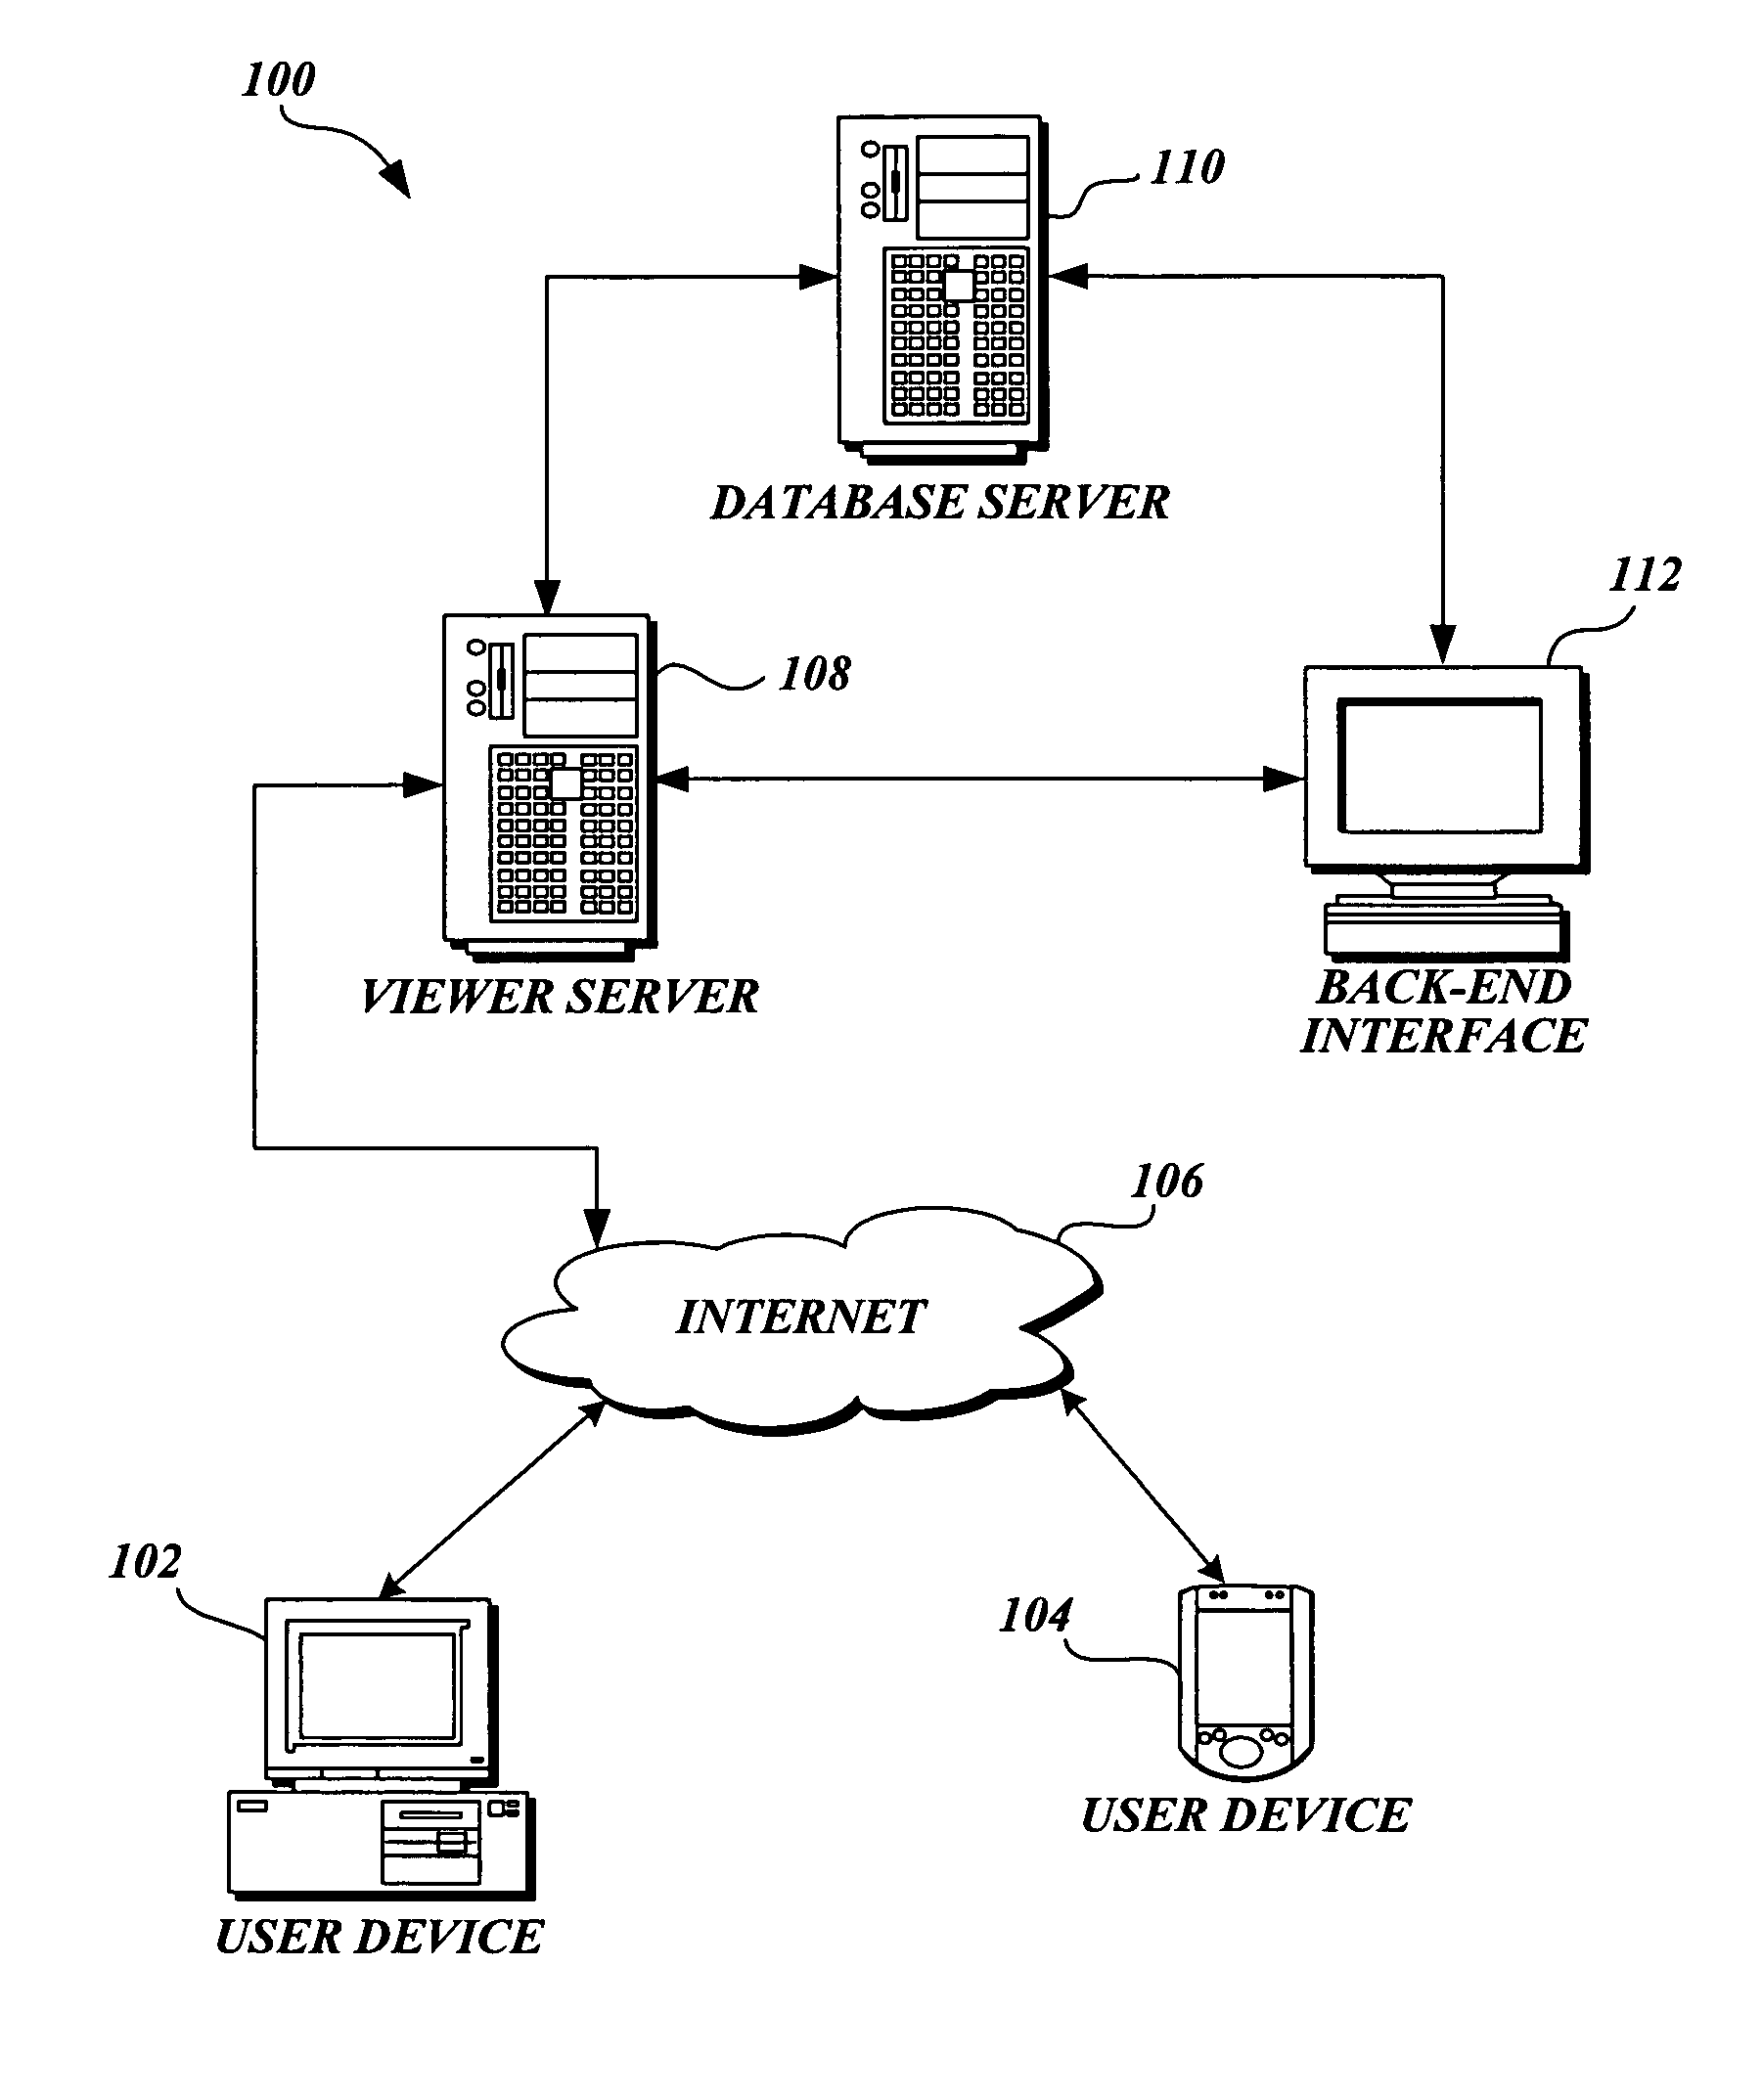 Method and apparatus to facilitate online purchase of works using paid electronic previews